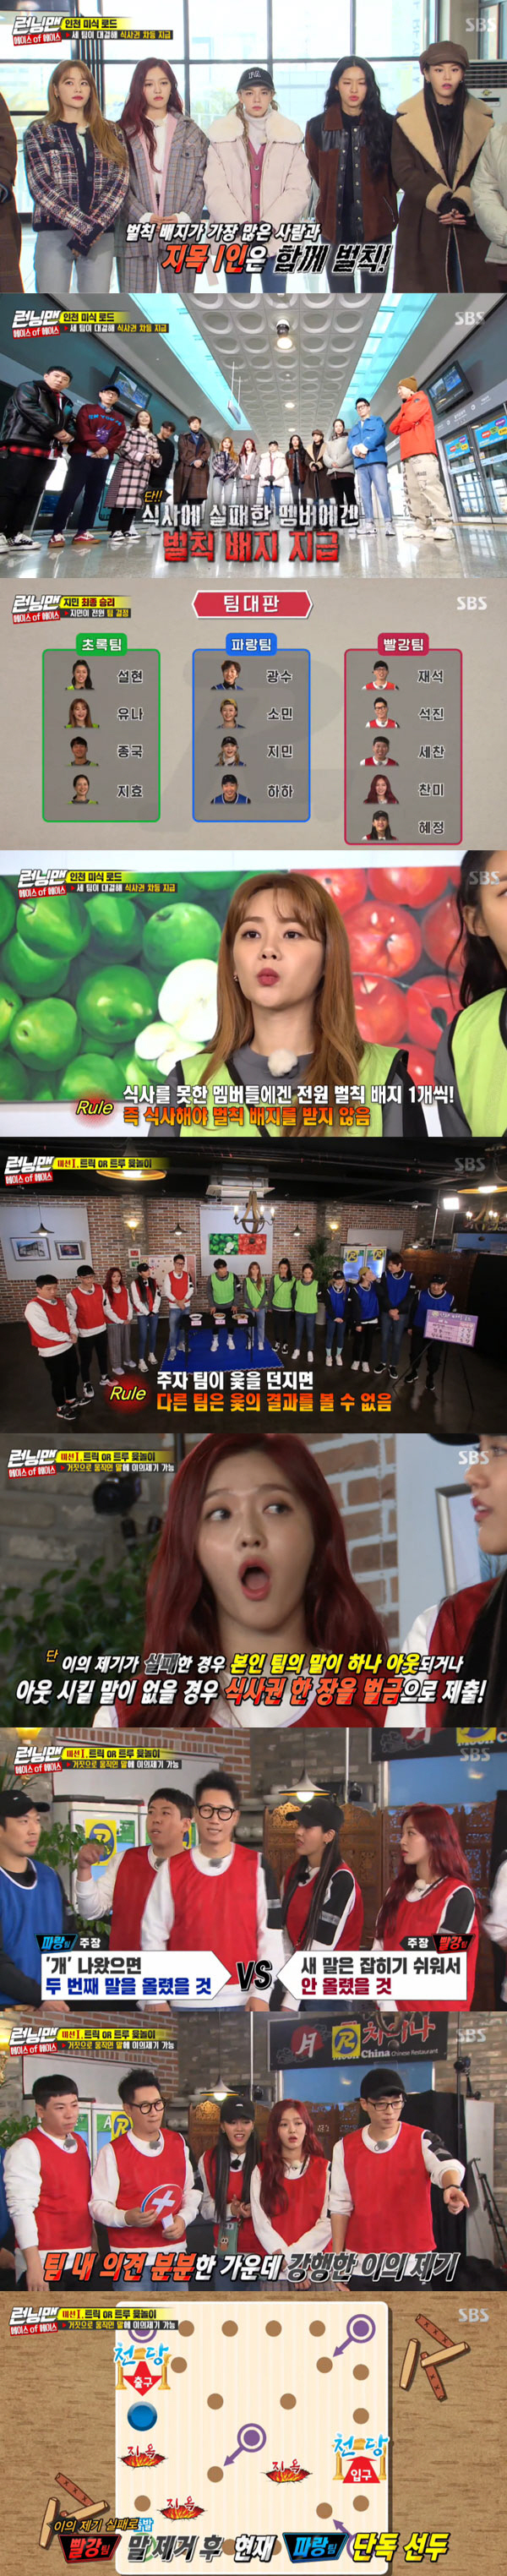 Running Man AOA Jimin carries out fresh cream penaltyOn SBS Running Man broadcasted on the 15th, AOA appeared as a guest while Incheon Gourmet Road Ace Of Ace Race was held.On this day, Ace Of Ace Race is divided into three teams and a total of three rounds are held.The menu-specific meal ticket is available after submitting a fixed meal ticket; the meal ticket available on the first mission is paid by the number of team members; however, a penalty badge is paid to members who fail to eat.The person with the most penalty badges and the one person who is identified will be punished together.Jimin, who was in first place through Game, decided on the team.As a result, Kim Jong-kook, Song Ji-hyo, Sulhyun, Yuna were one team for Konyaspor team, Lee Kwang-soo, Jeon So-min, Jimin, Haha were one team for blue team, and Yoo Jae-Suk, Ji Suk-jin, Yang Se-chan, I have a team.The first mission was to eat jjajangmyeon, chanpon, sweet and sour pork, and to get a meal ticket, trick or true yunori was conducted.The basic rule is the same as the general yut, and the team that comes in first wins the final, but if the runner team throws the yut, the other team can not see the result of the yut.The runner team moves truth or false, regardless of the result of the yut.At this time, the other two teams object if they are thought to be cheating, and if they cheat, the teams words that lie will be In-N-Out Burger and the teams words will take over the gap.Game progressed, and the blue team took the lead alone by eliminating the red teams words due to the failure of the red teams objection.However, the blue team, which has been running out since then, failed to raise objections and eventually won a penalty badge.At that time, the red team properly grasped the lies of the blue team, and the blue team moved as much as the Yut that lied, and the first place was confirmed.In addition, the blue team attempted a last-minute adventure and challenged the Konyaspor teams falsehood and got five meals in second place.The second mission is to Come to the right of me, and the attacker wears an eye patch and finds a team with a pillow and gets one point.However, if the same team is hit or the staff is hit, it will be deducted by two points; the game results show Konyaspor team ranked first, the red team ranked second, and the blue team ranked third.The last menu was also a smart survival to eat samchi grilled, kangpung crab, and bean soup.If you find a hidden weapon and touch the other person, you will proceed with the acquired weapon, and the other party will be In-N-Out Burger when you win.If you fail, you can find another weapon in 10 seconds and escape.Kim Jong-kook later acquired a wrestling weapon, touching Lee Kwang-soo; as a result of the wrestling, he was In-N-Out Burger of Lee Kwang-soo.In addition, Konyaspor team won the final victory with successive attack success, Konyaspor team was first, blue team was second, and red team was third.After the final game, Jeon So-min and Jimin were two penalty badges, and Jimin was decided to be the final penalty through OX.Jimin then chose Lee Kwang-soo, and the two were punished for fresh cream.